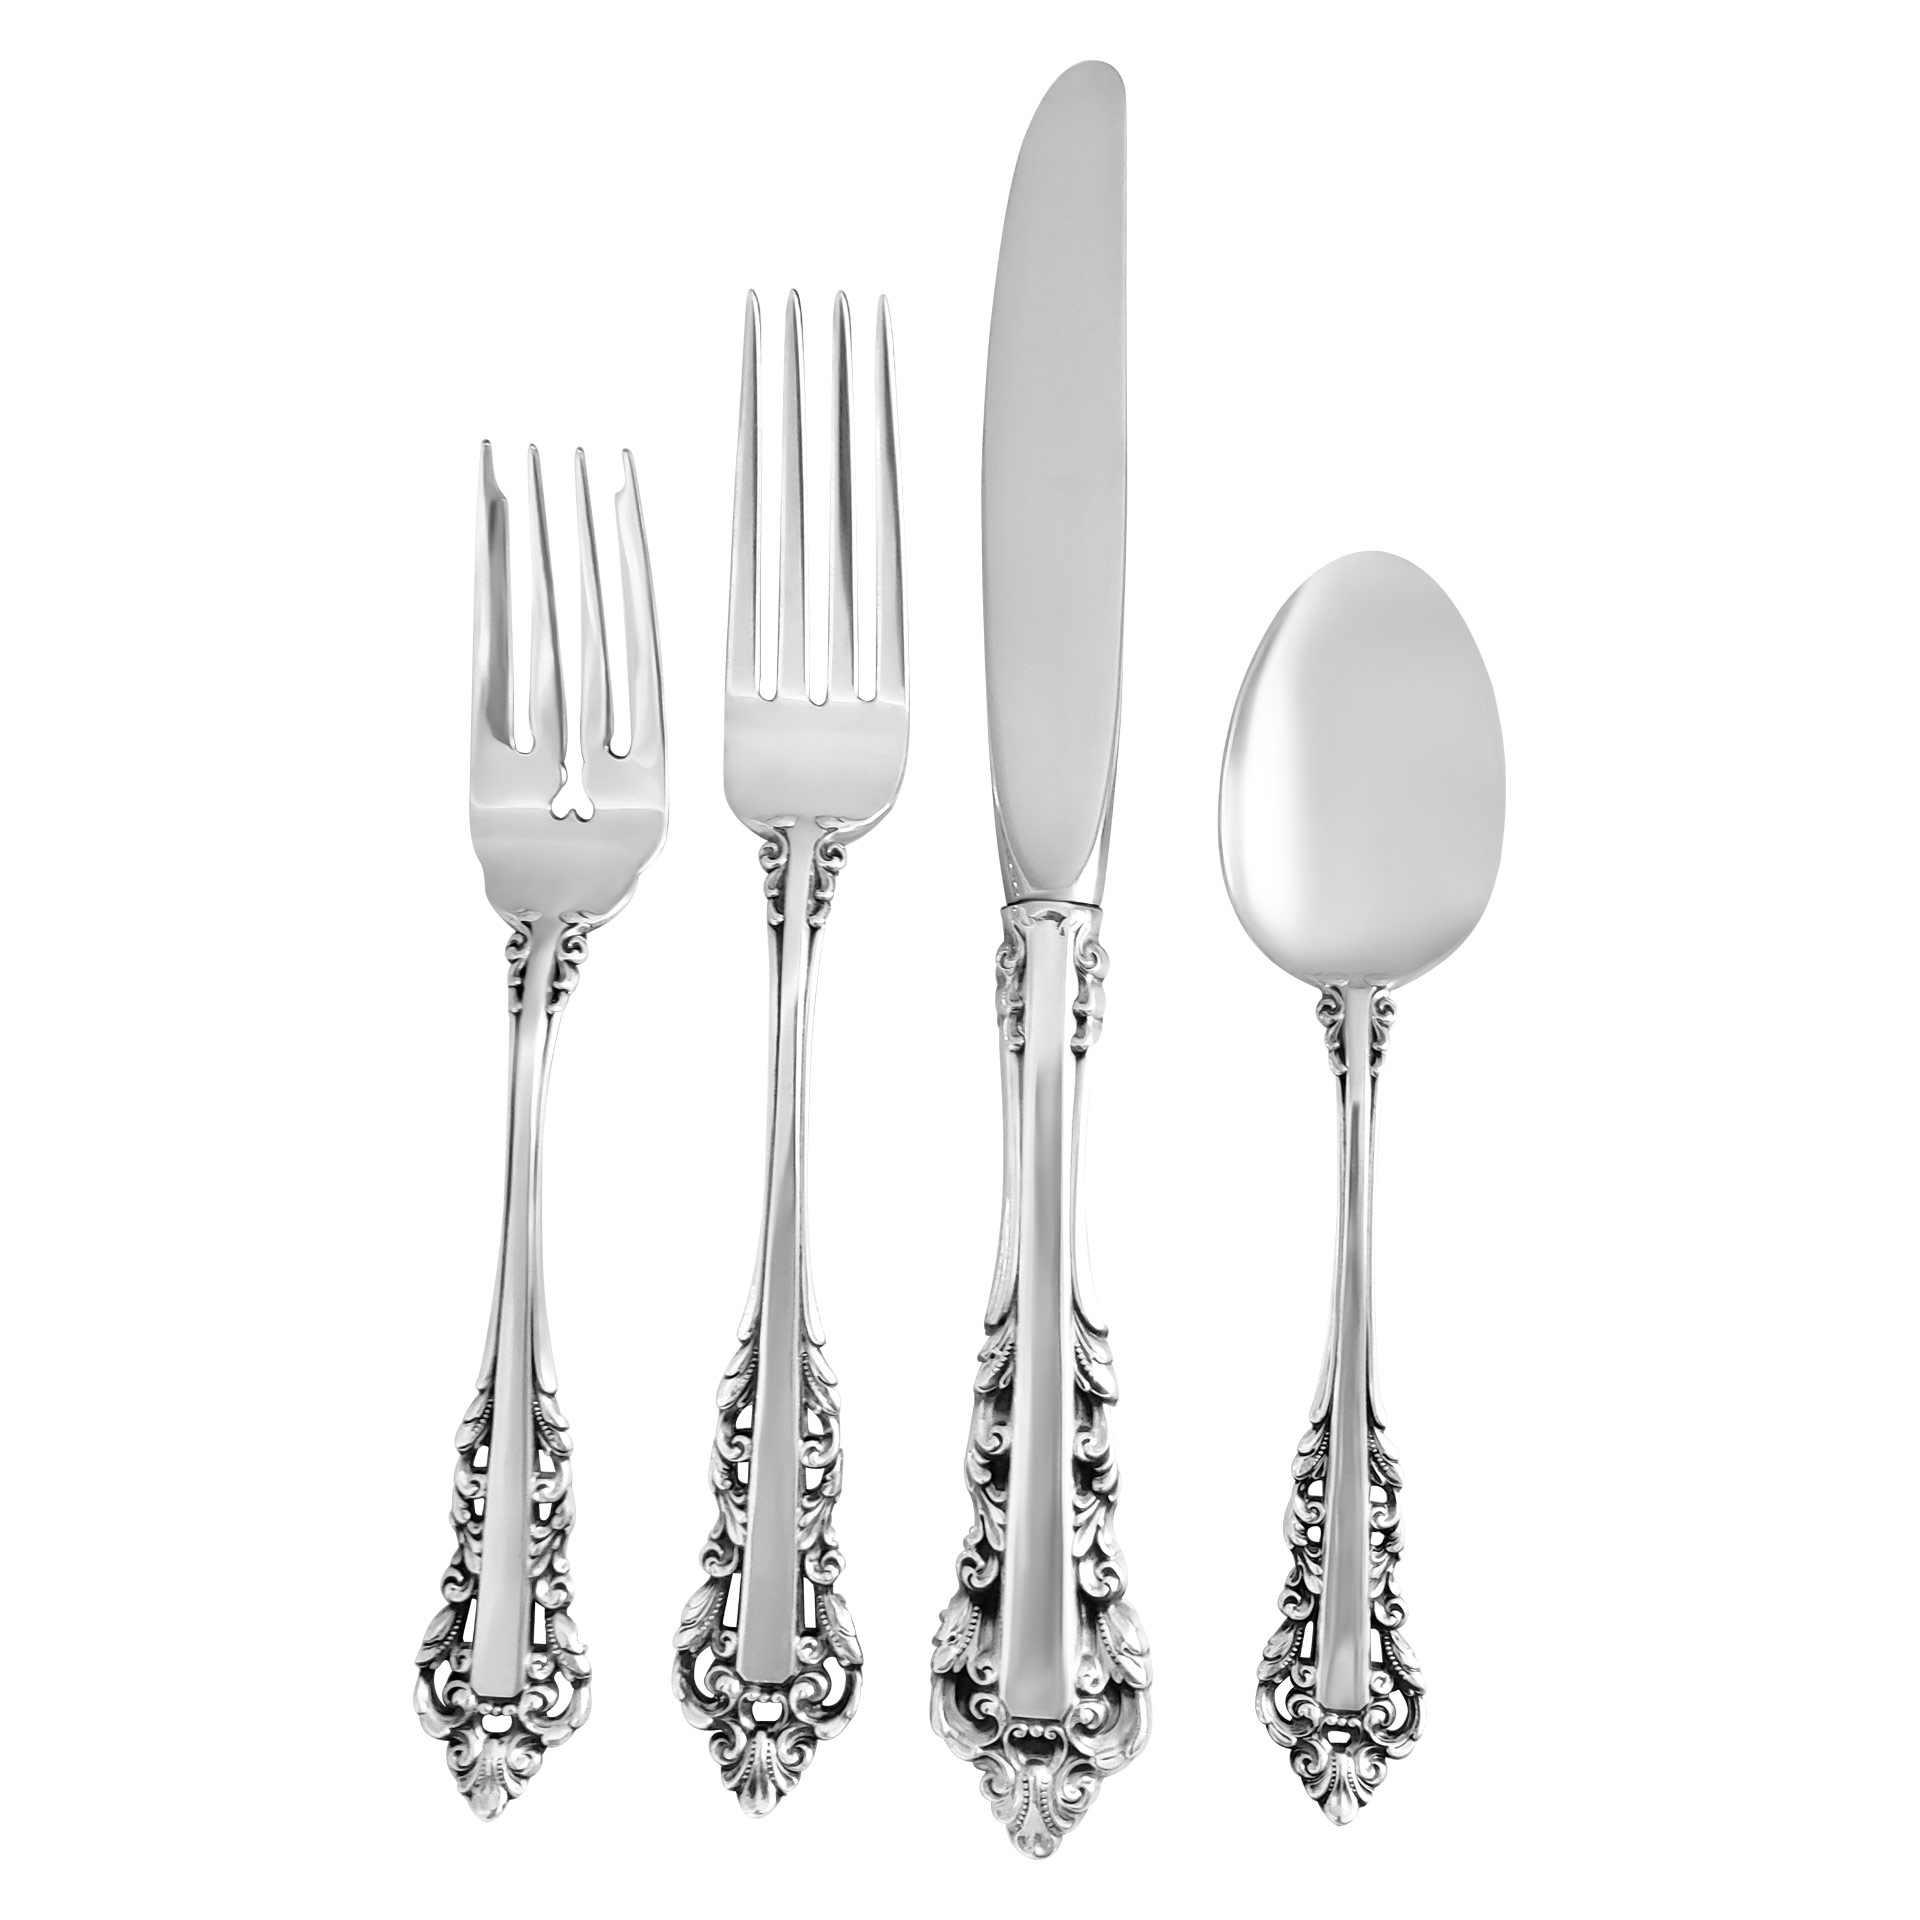 "MEDICI" Sterling Silver Flatware Set by Gorham, patented in 1971- 4 place setting for 12 (some are 16) with 2 seving pieces. Over 2000 in sterling silver.